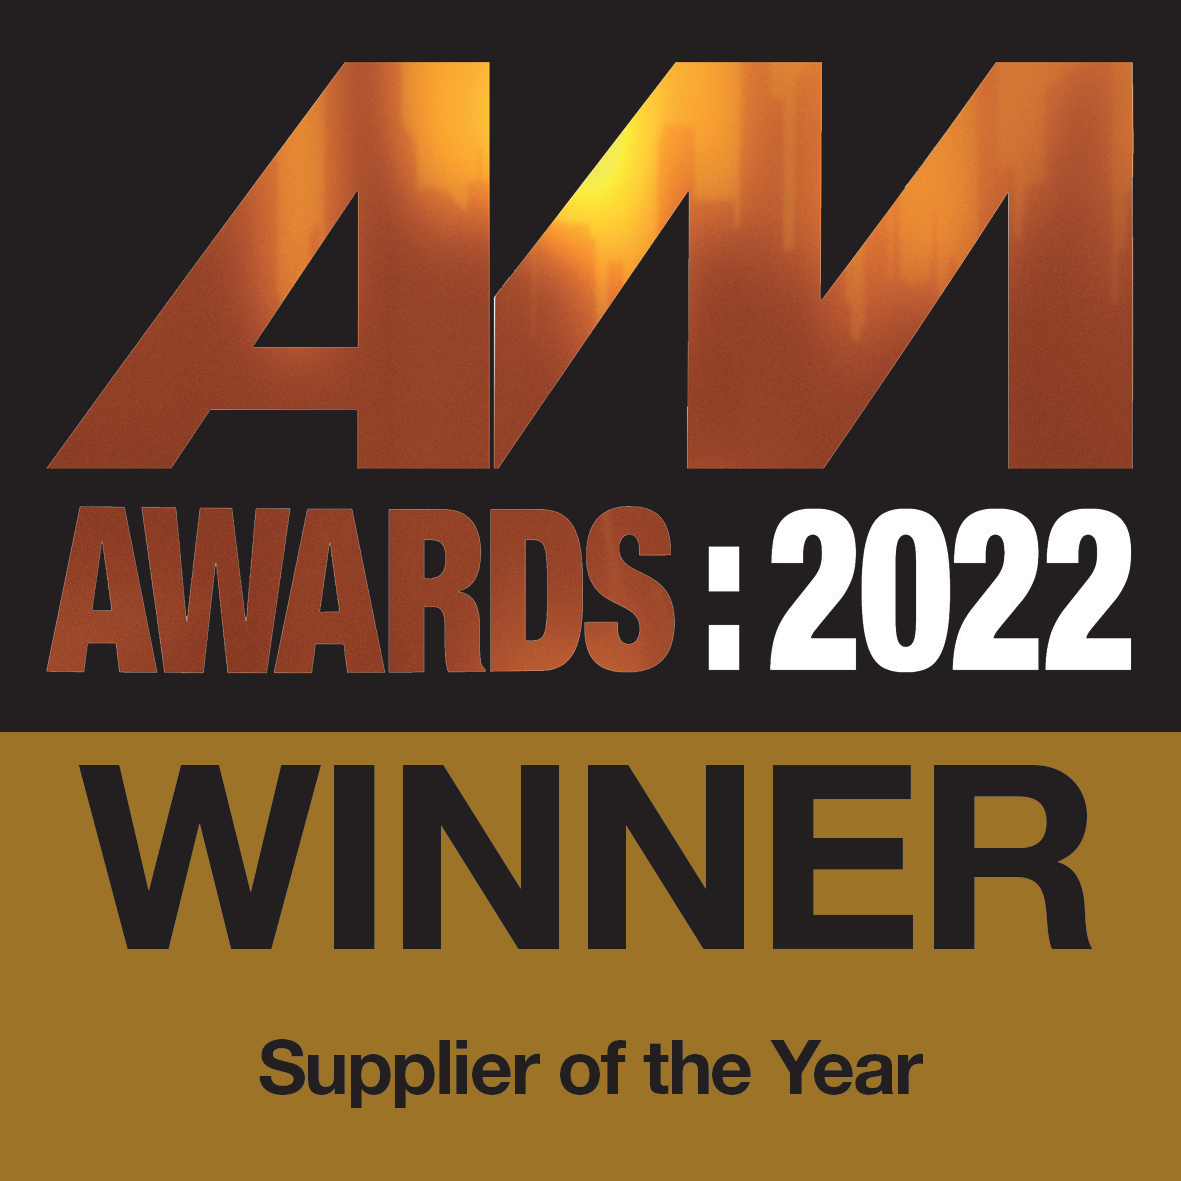 AM Awards:2022 Winner, Supplier of the year